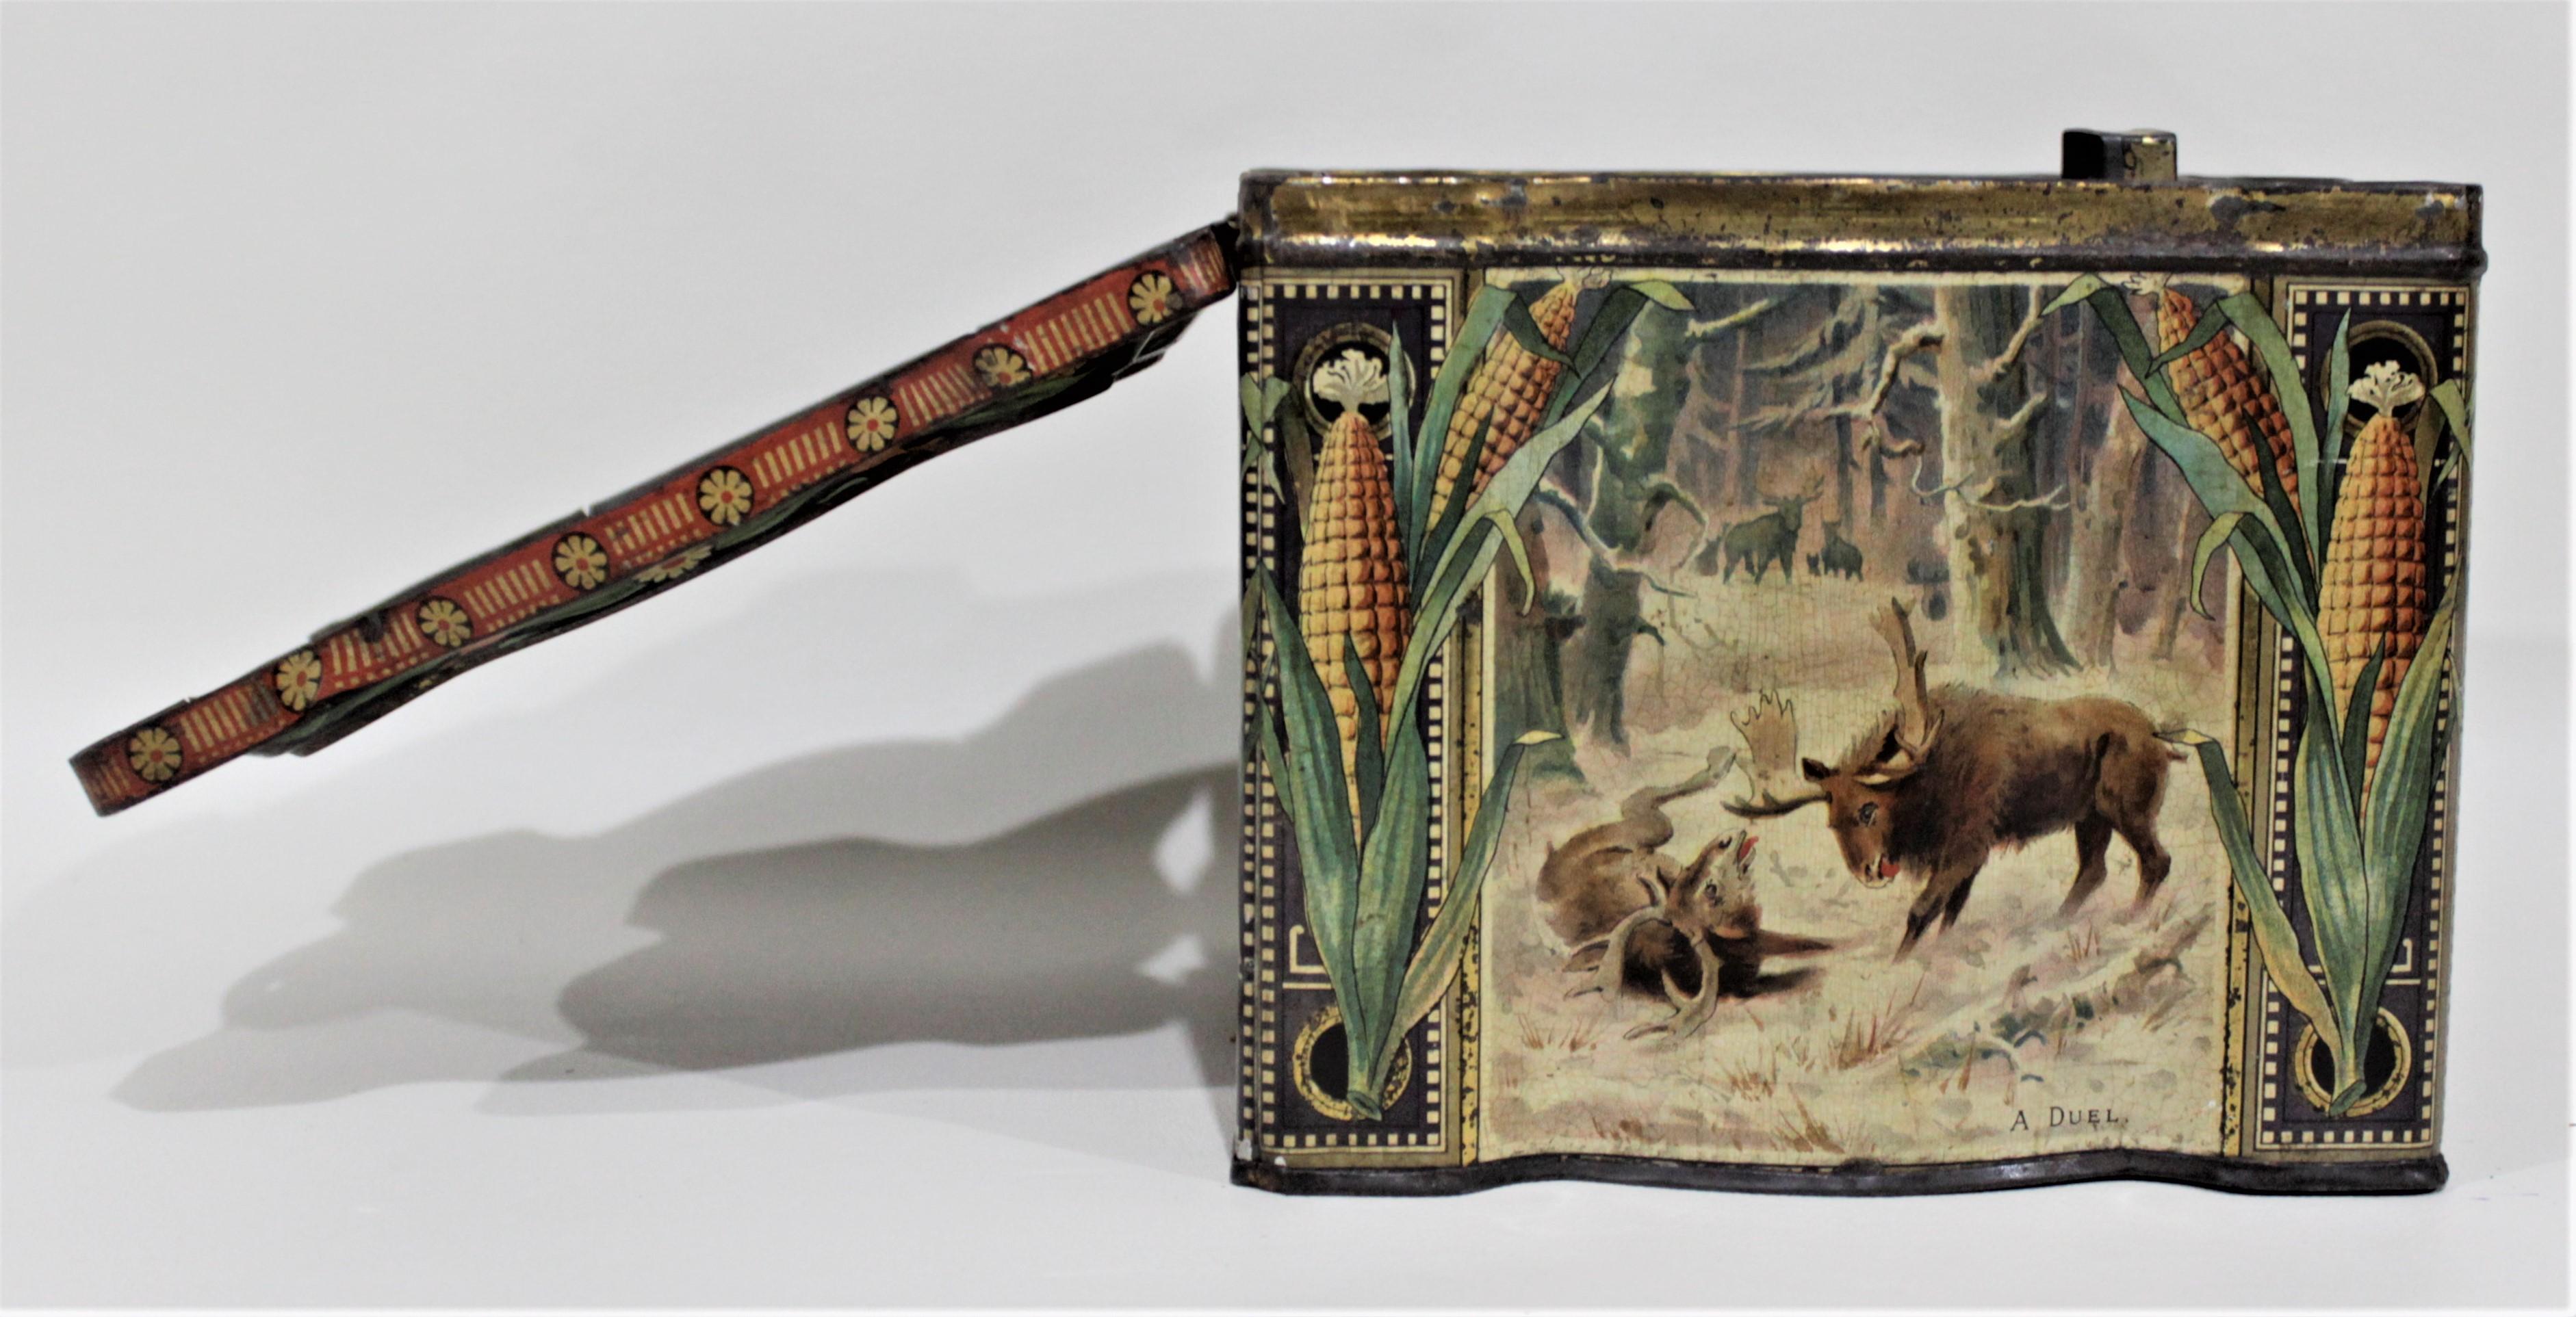 19th Century Antique Keen's Mustard Advertising Tin with Indigenous American & Western Scenes